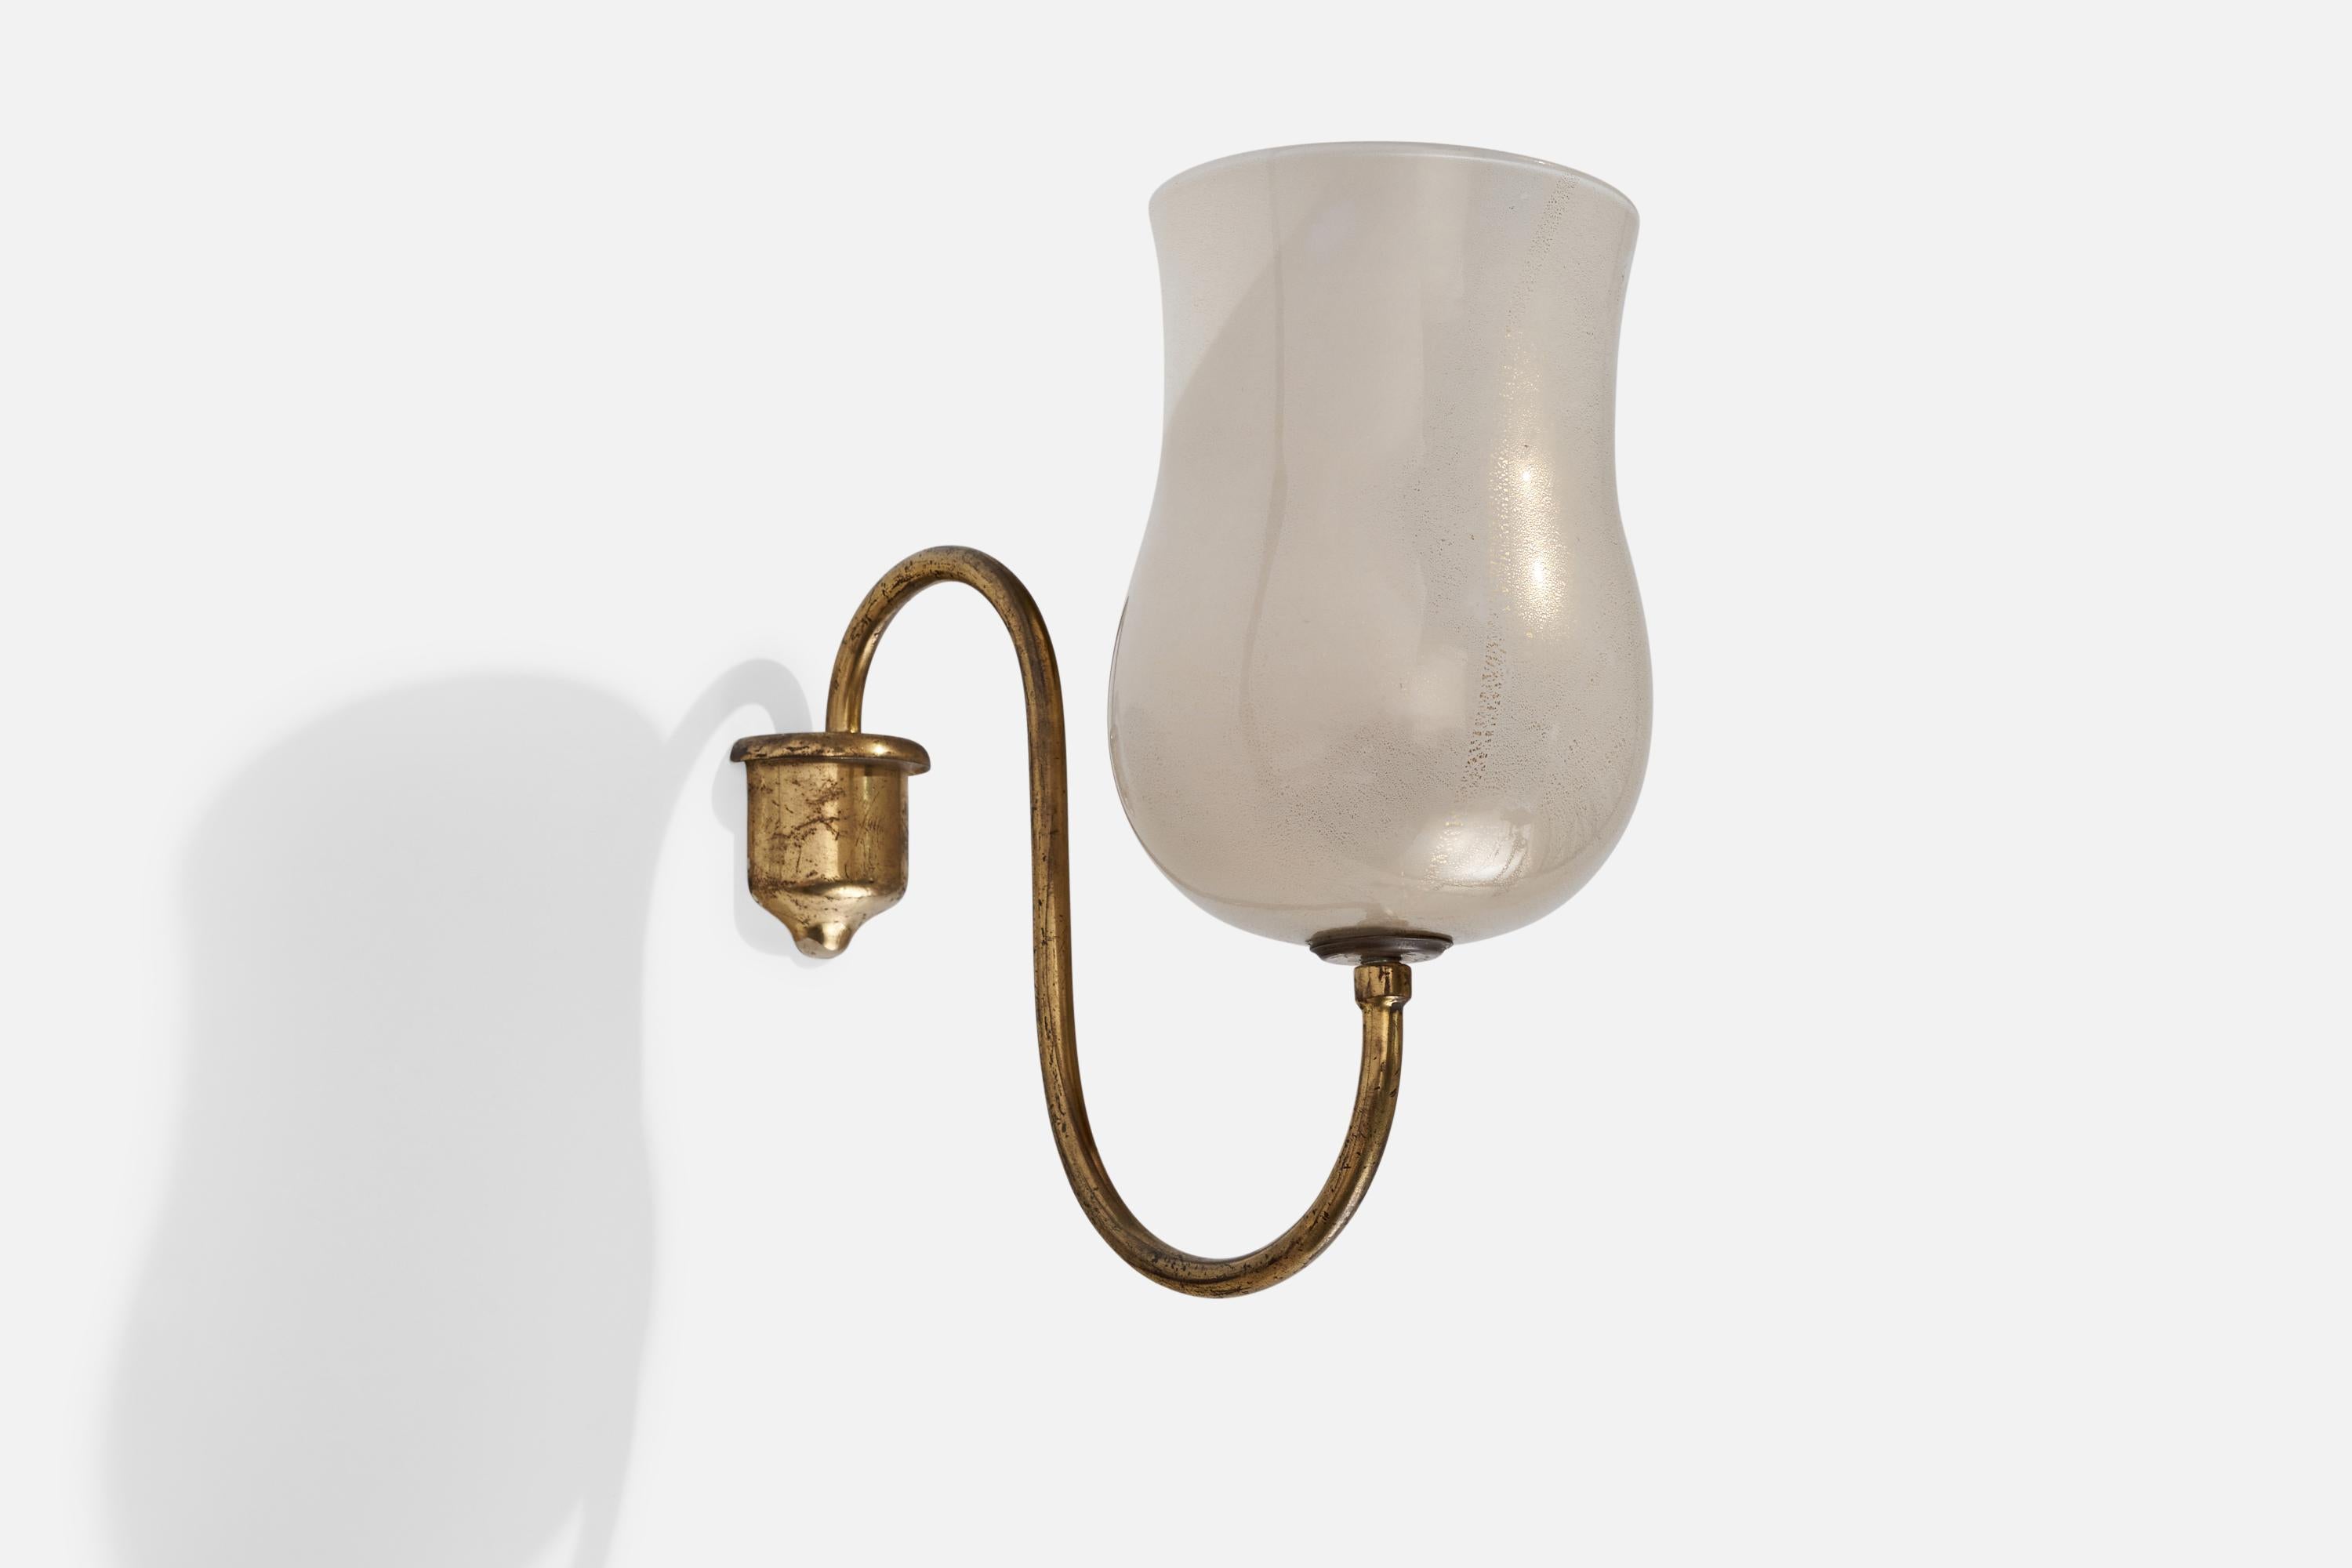 A brass and glass wall light designed and produced in Italy, 1930s.

Overall Dimensions (inches): 10” H x 4.125” W x 10” D
Back Plate Dimensions (inches): 2.25” H x 2.22” W x 1.16” D
Bulb Specifications: E-26 Bulb
Number of Sockets: 1
All lighting